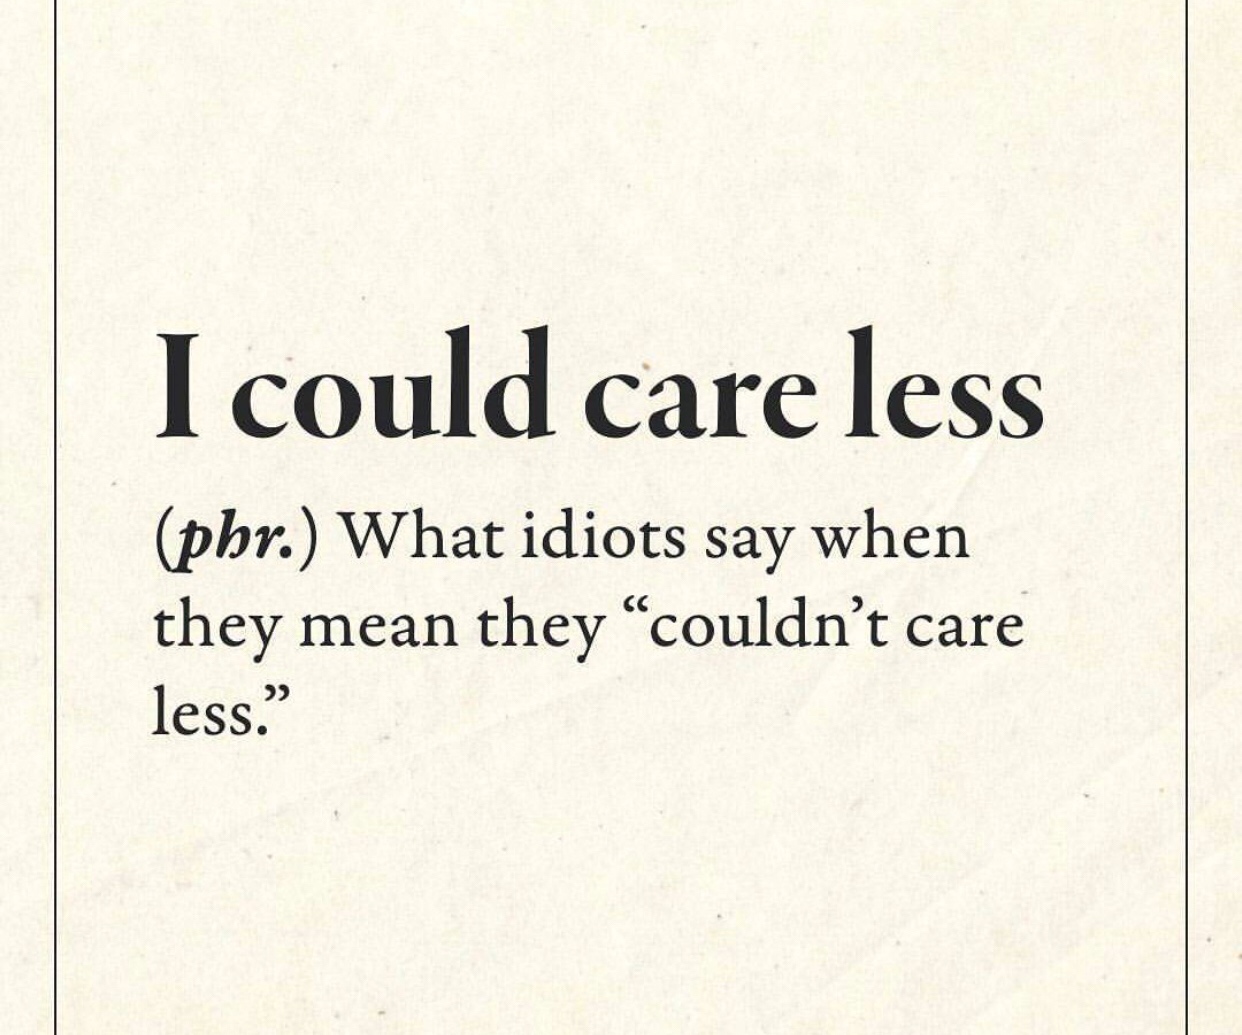 paper - I could care less phr. What idiots say when they mean they couldn't care less."